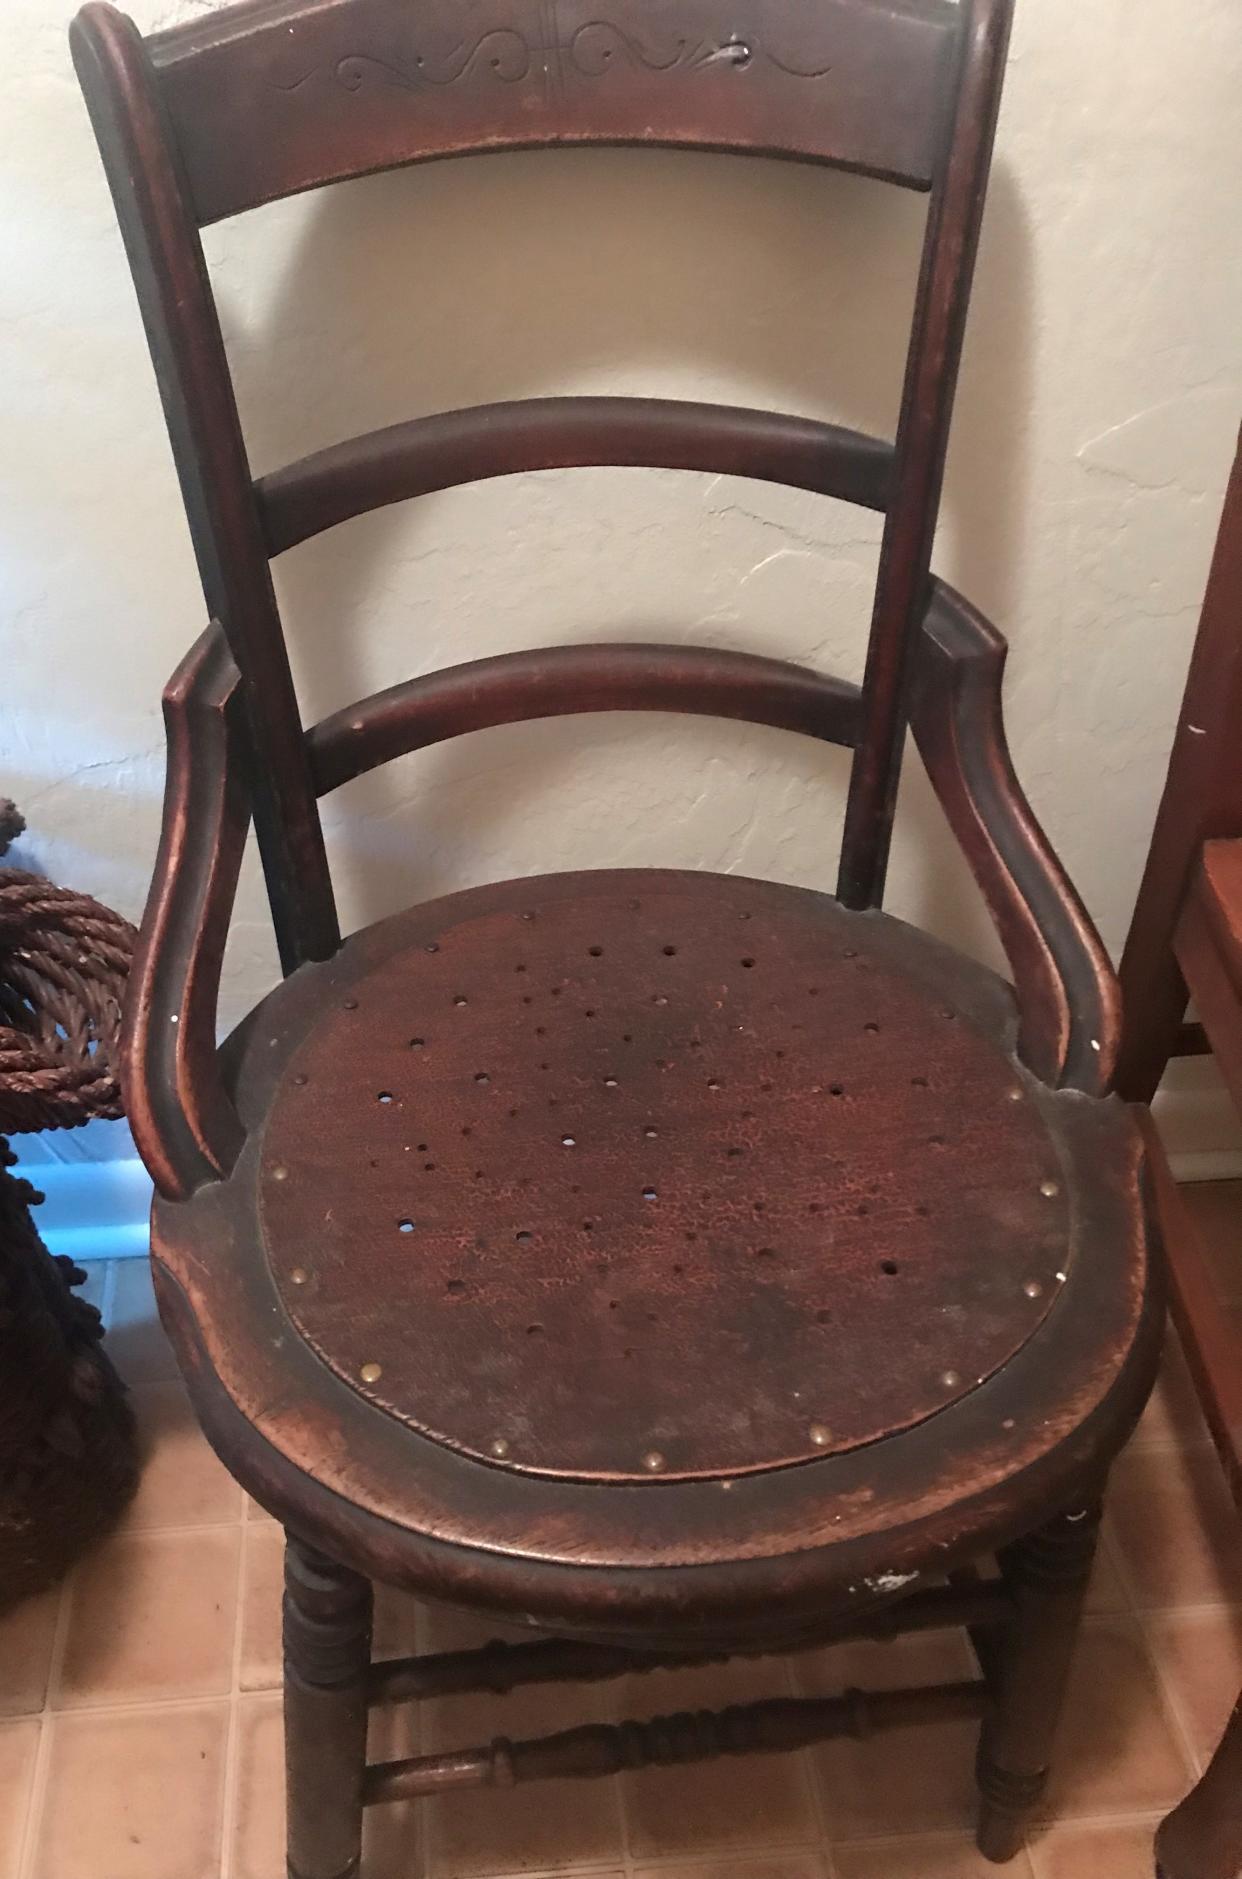 The style of this chair is Renaissance Revival that became popular after the Civil War.